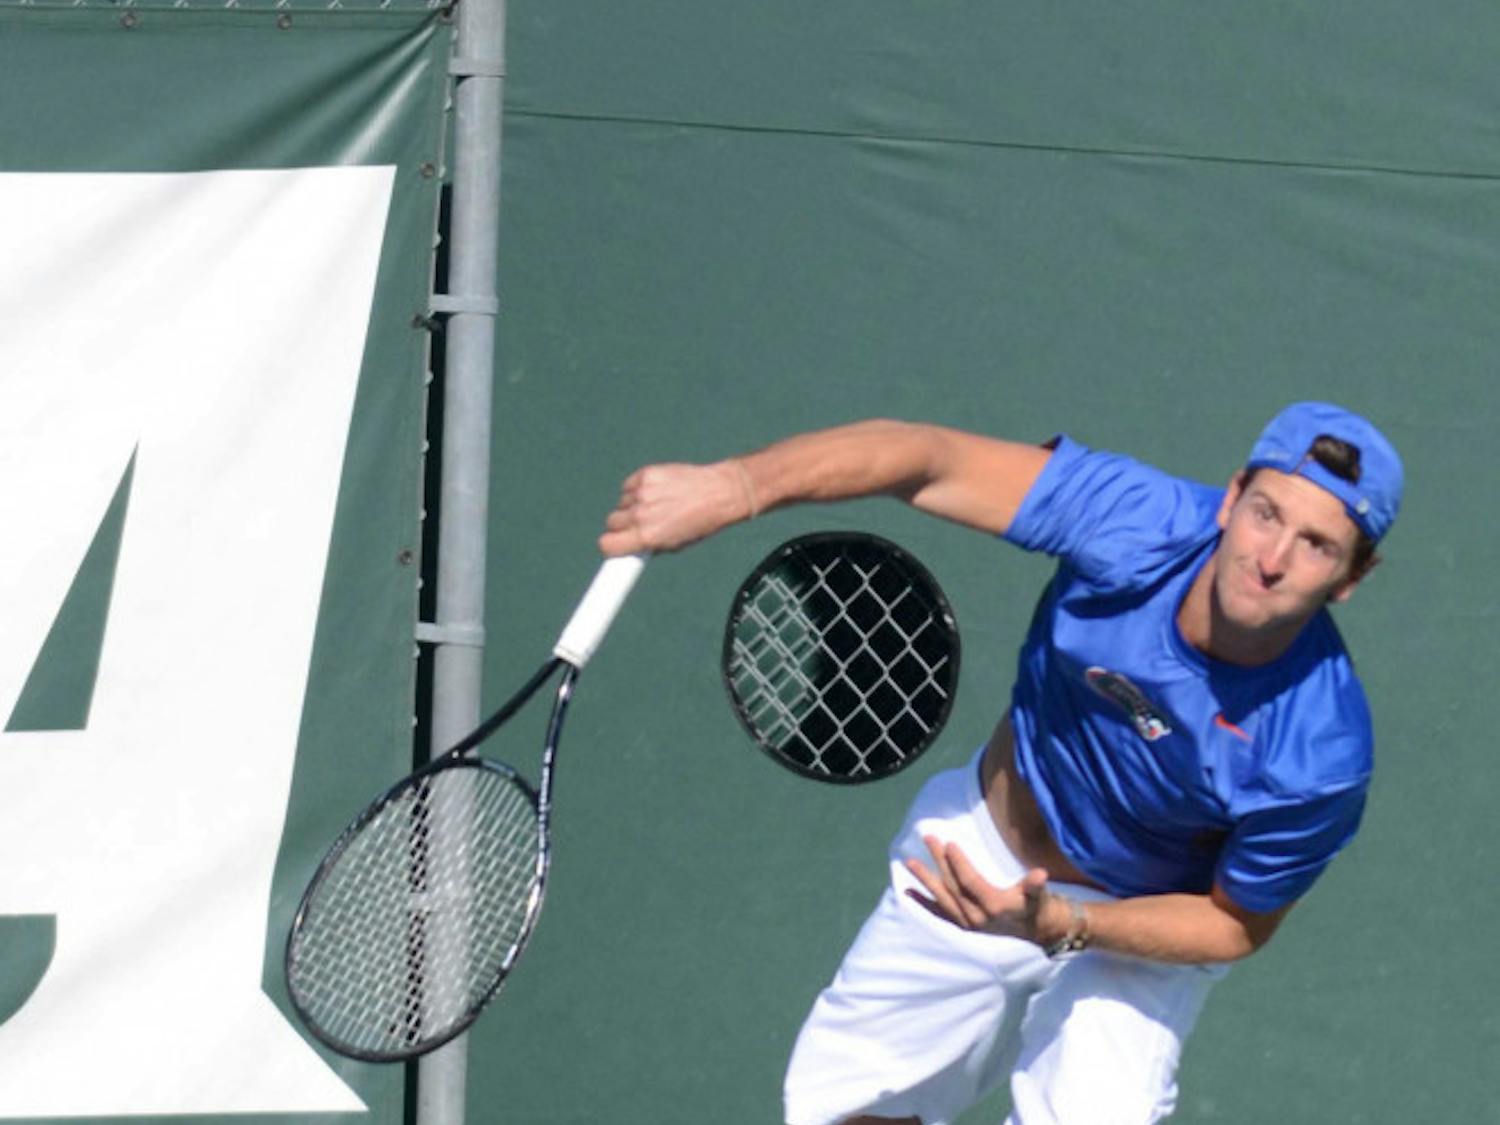 Gordon Watson serves during Florida's 9-3 win against William &amp; Mary.